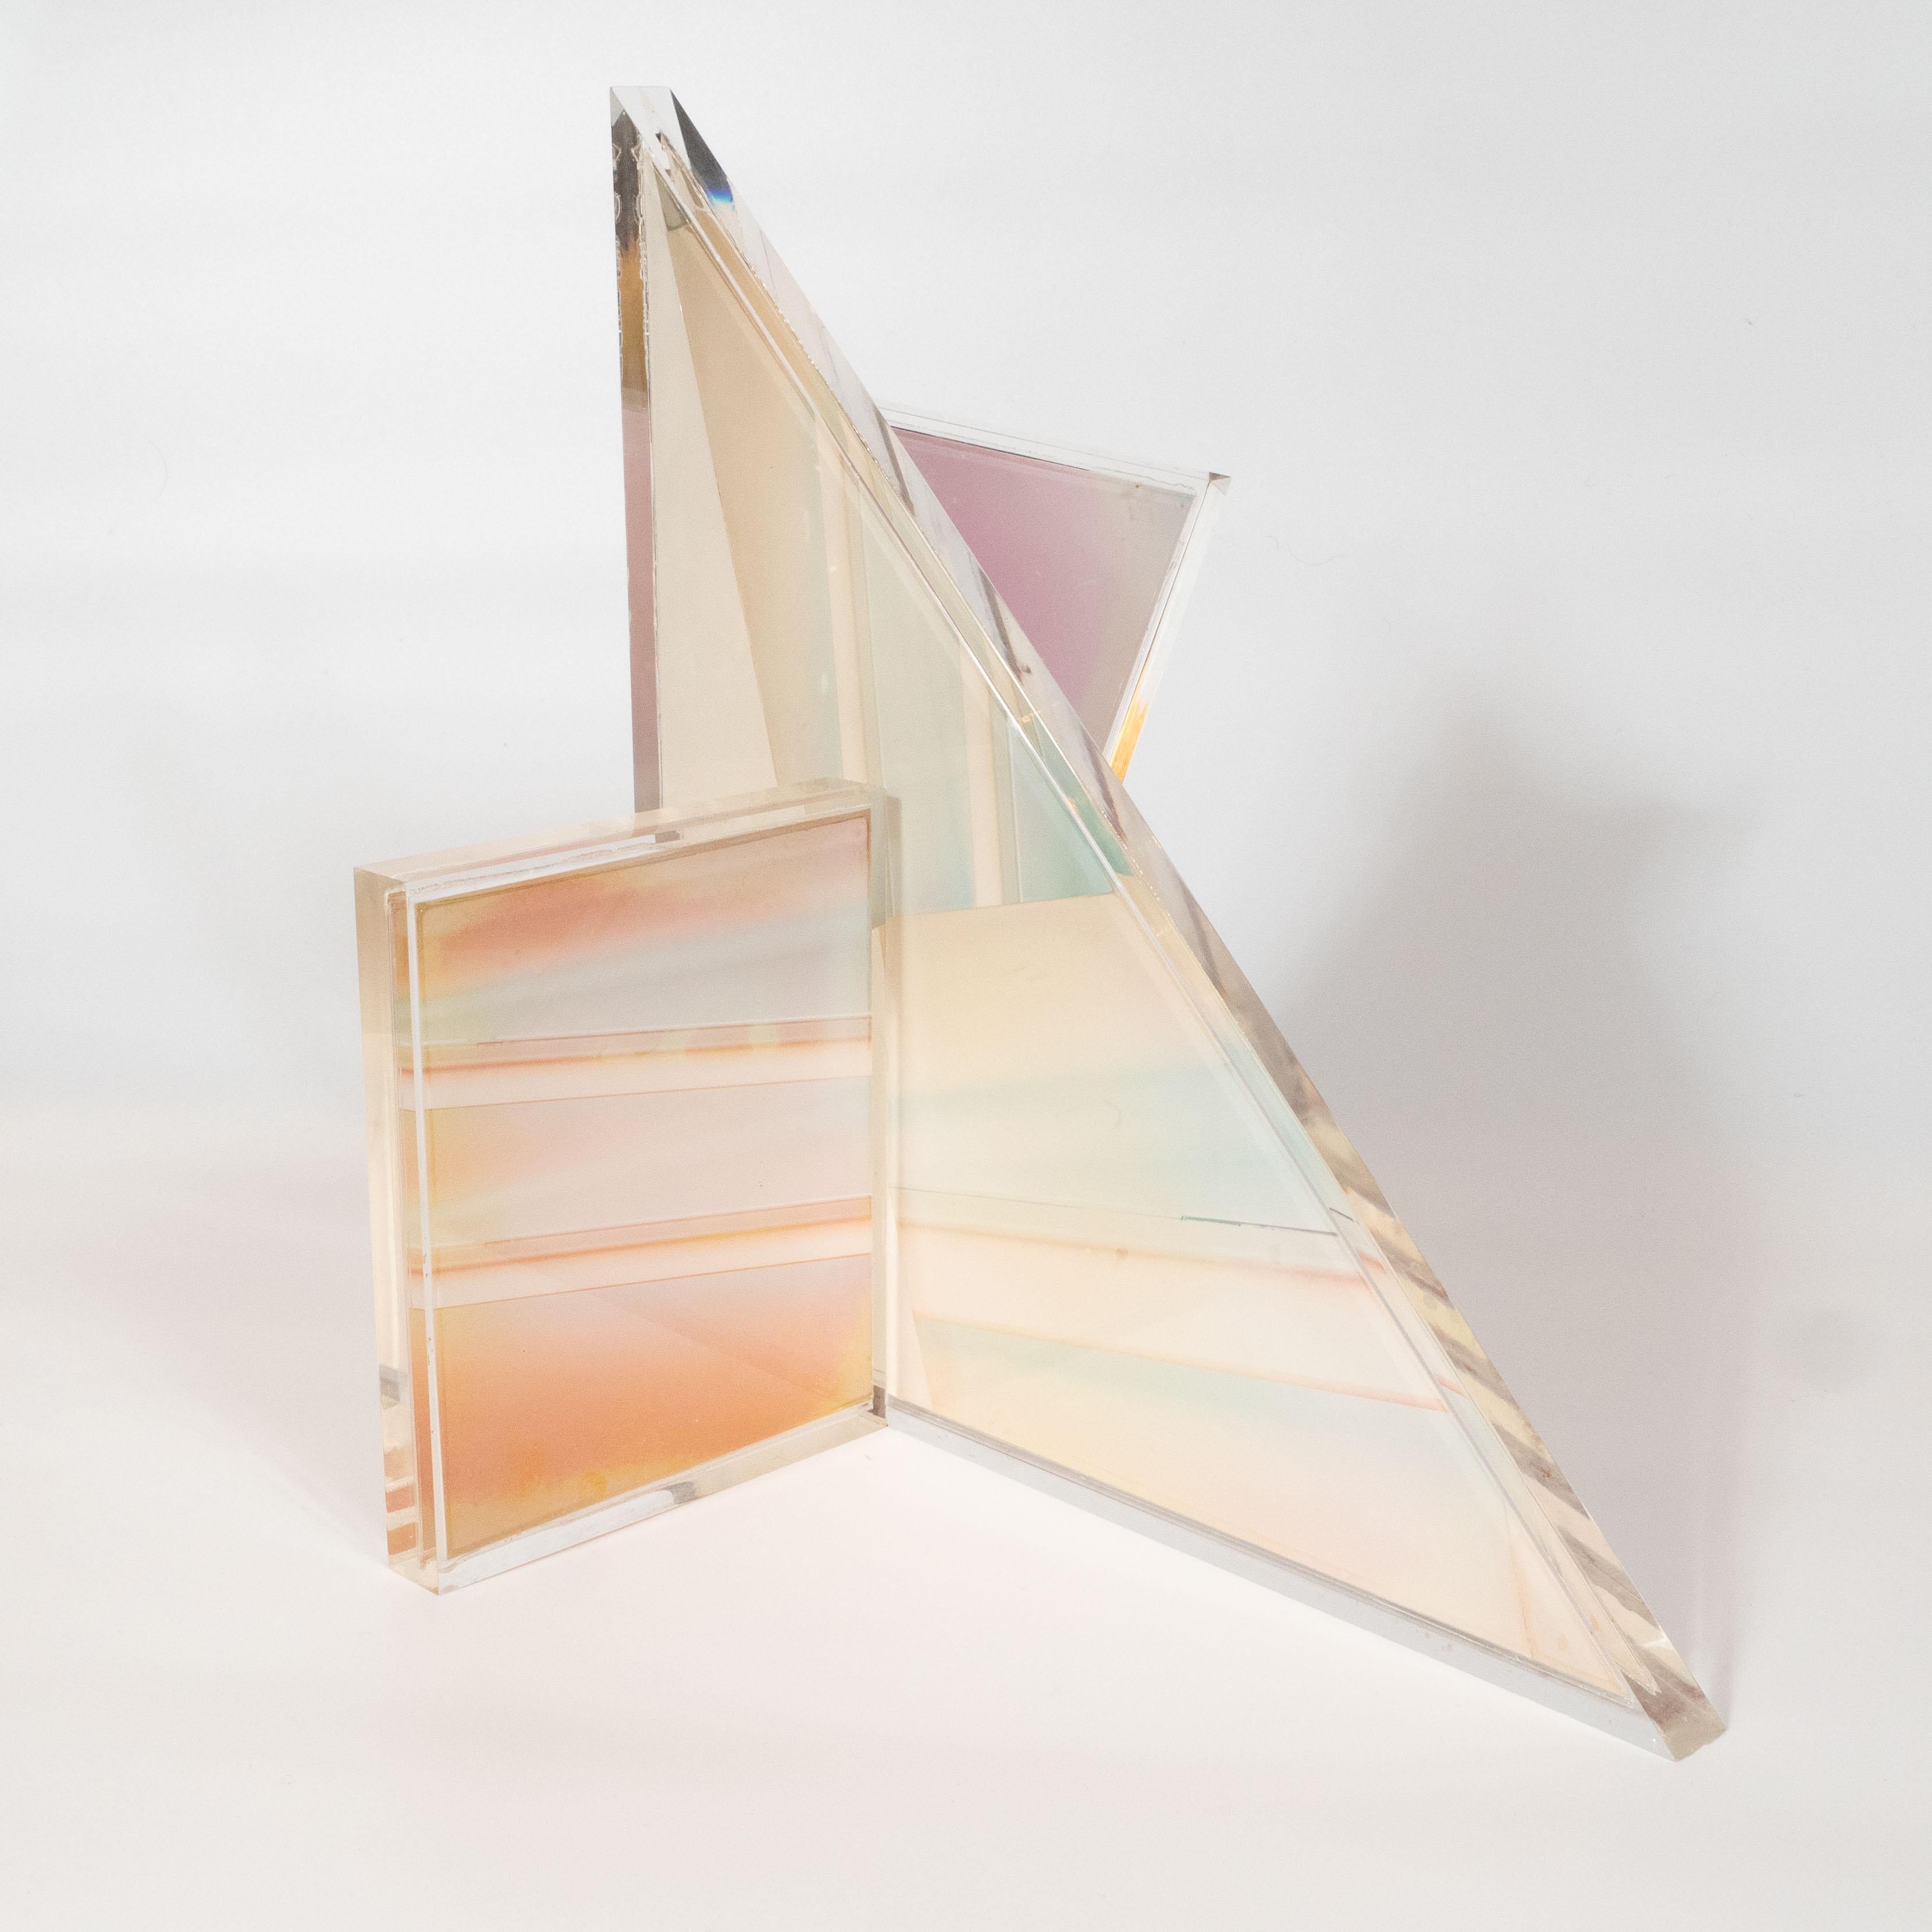 Late 20th Century Mid-Century Modern Polychromatic Cast Acrylic Sculpture by Norman Mercer